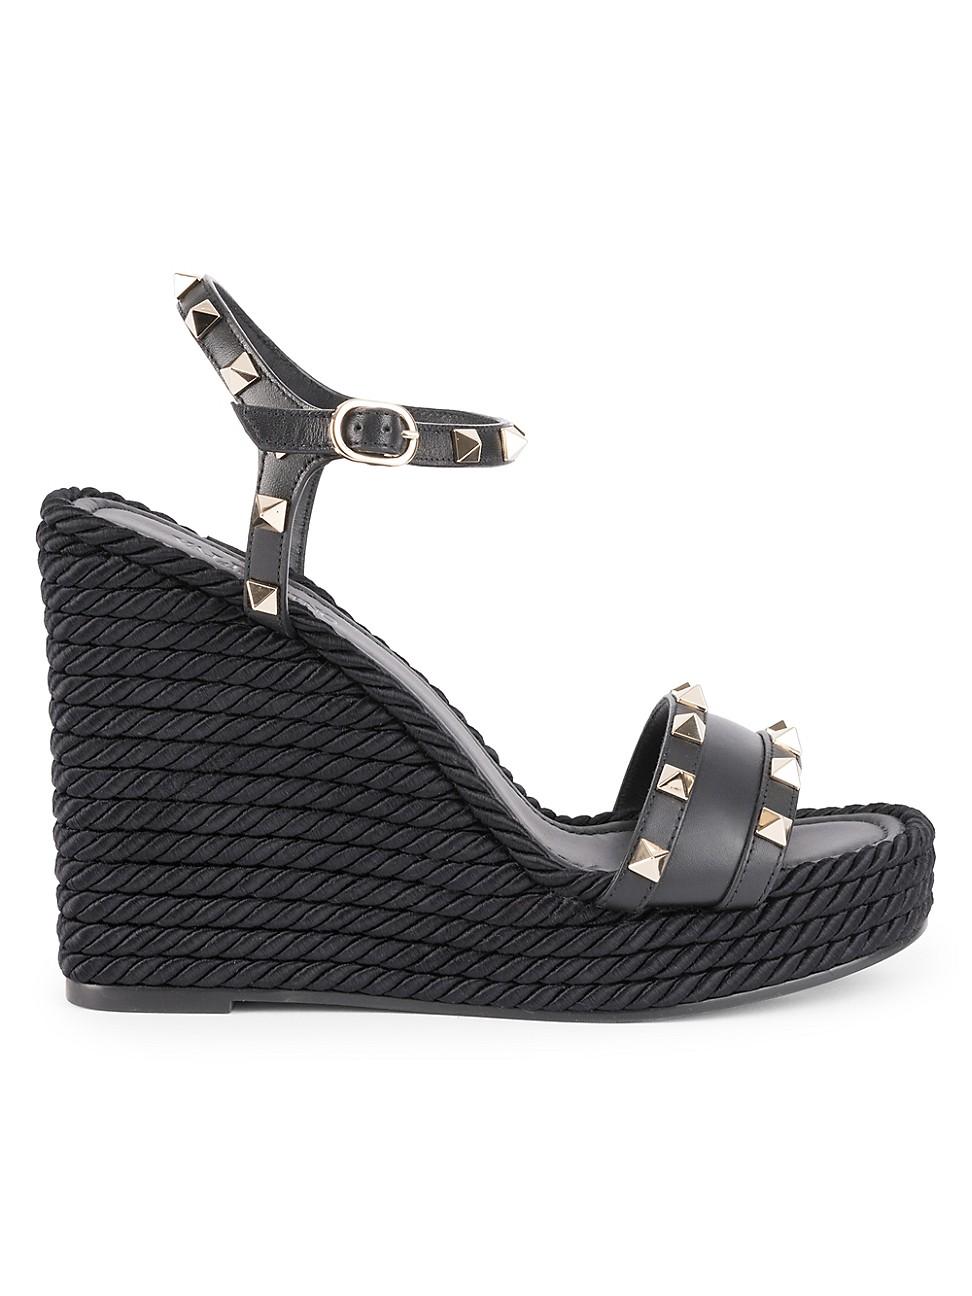 Valentino Torchon Rockstud Leather Wedge Sandals in Black - Save 50% - Lyst